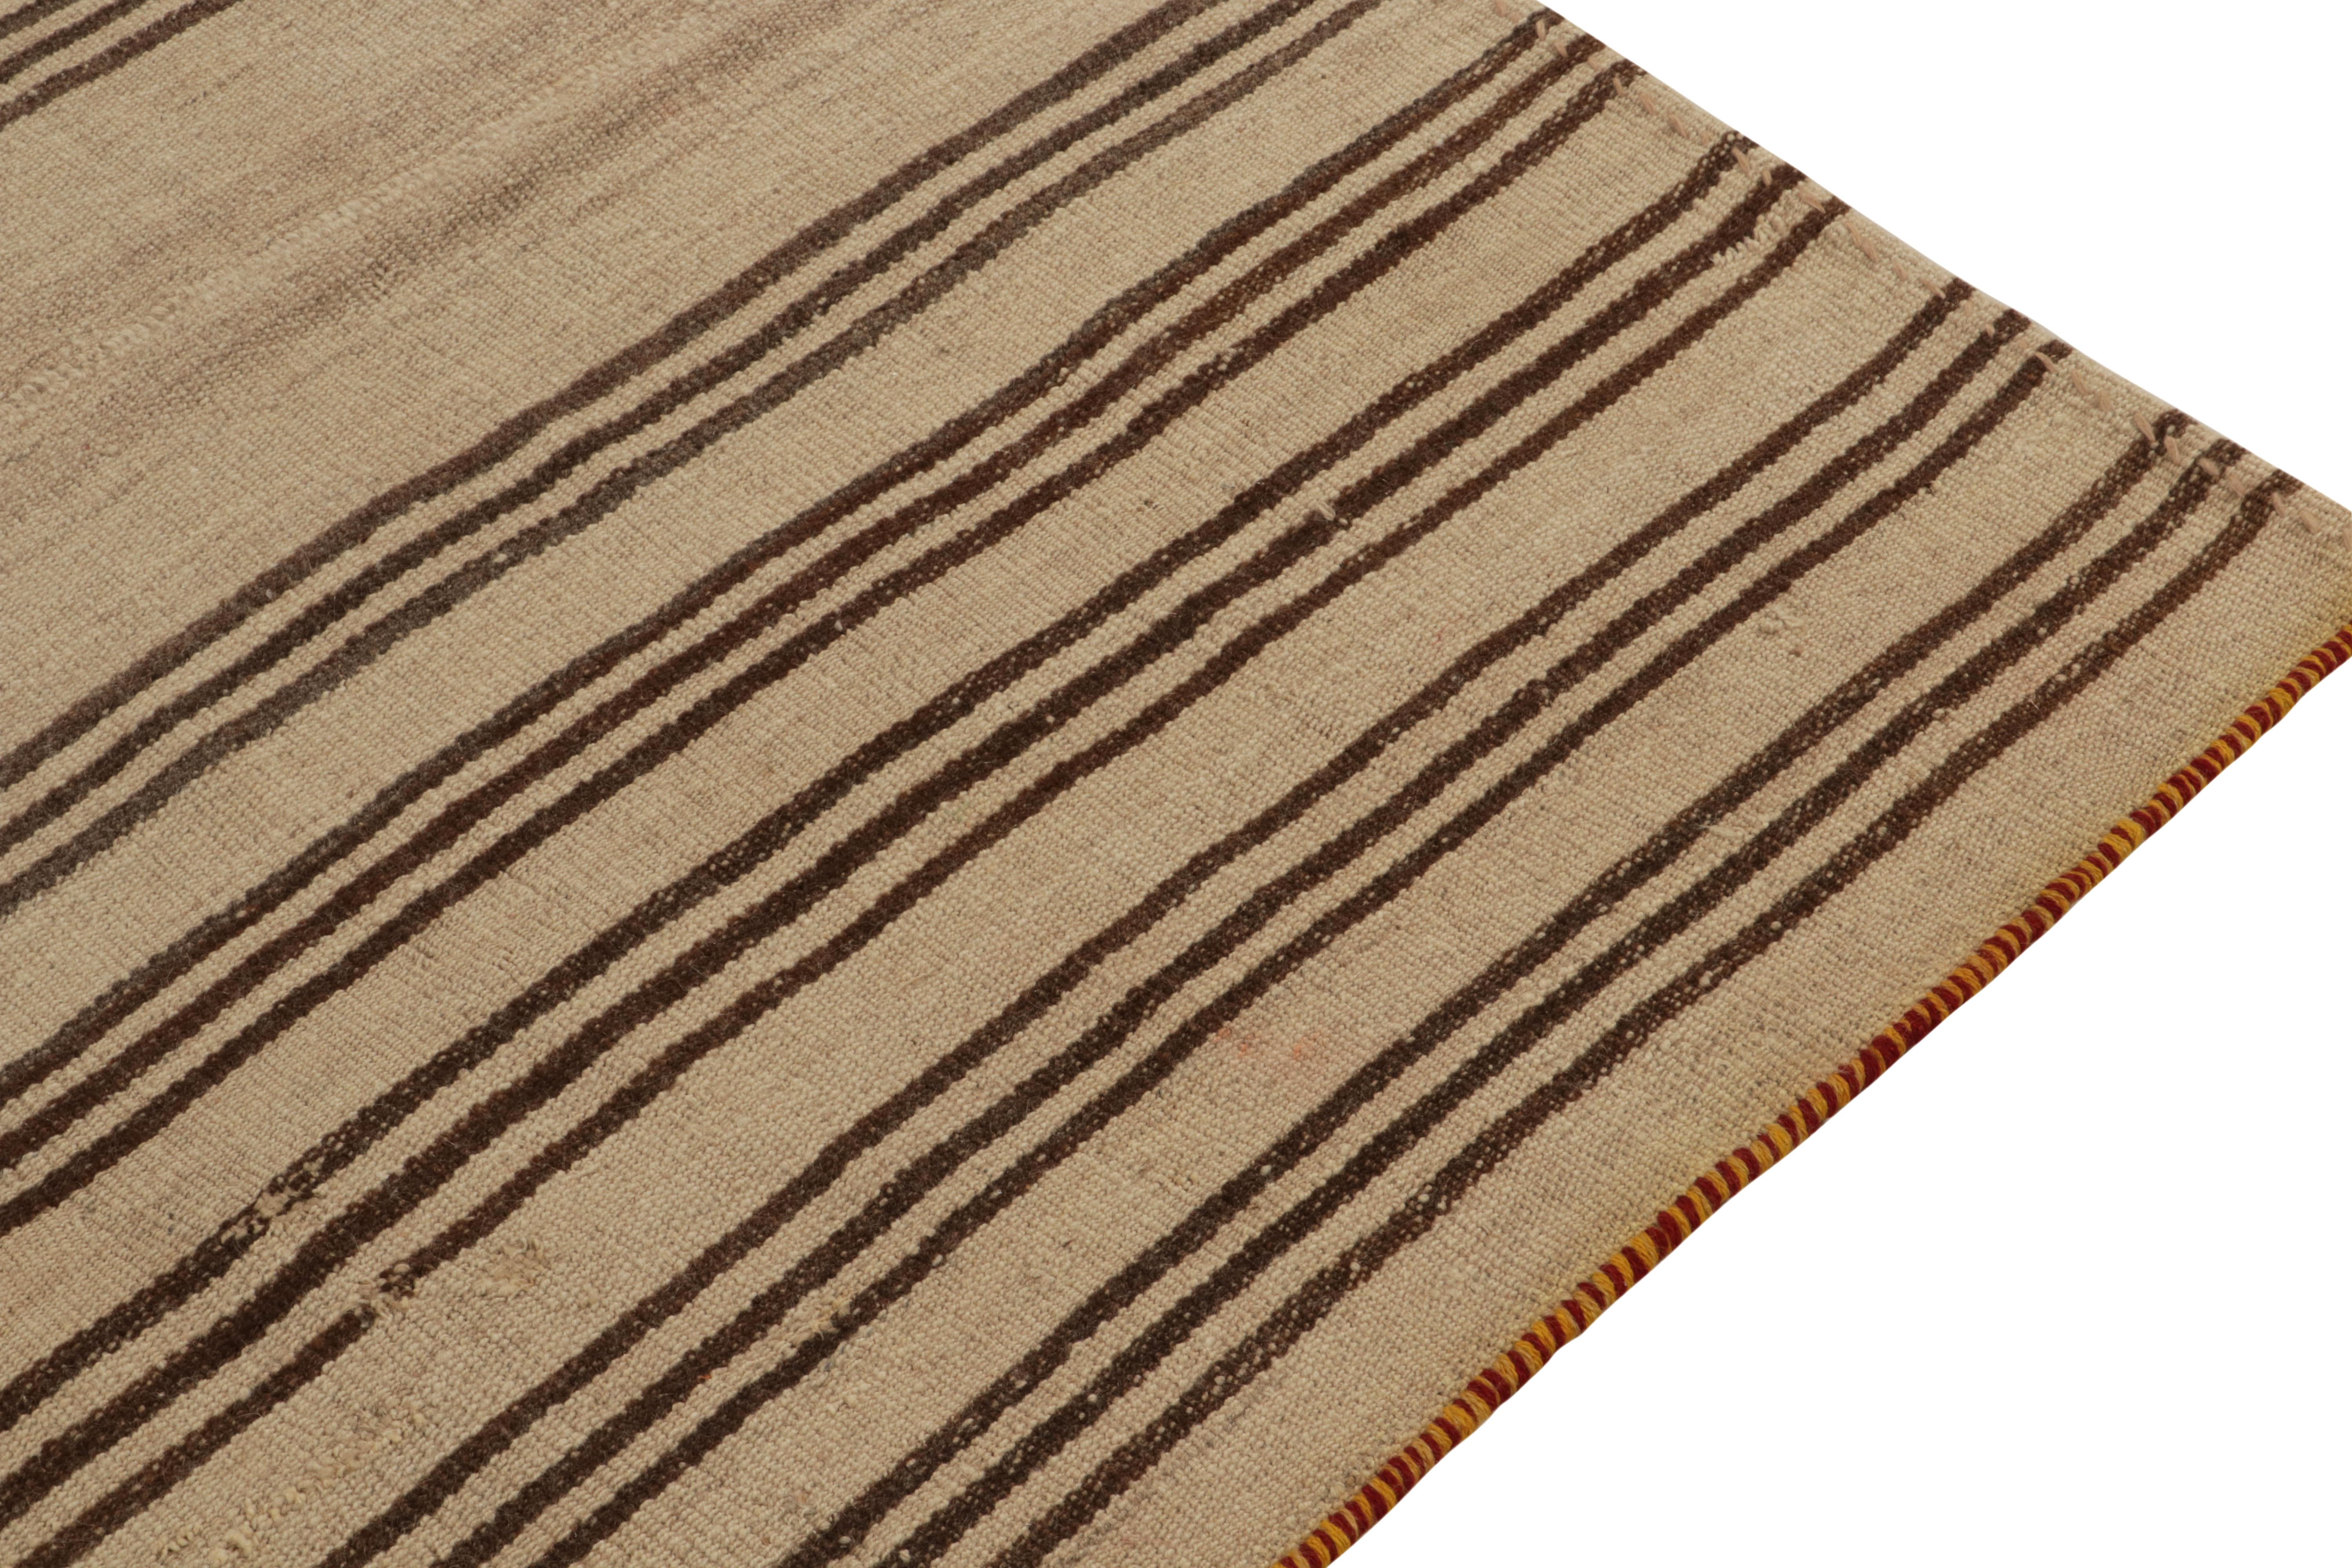 Hand-Woven Vintage Kilim rug with Beige-Brown Stripe Patterns, Panel-Woven by Rug & Kilim For Sale